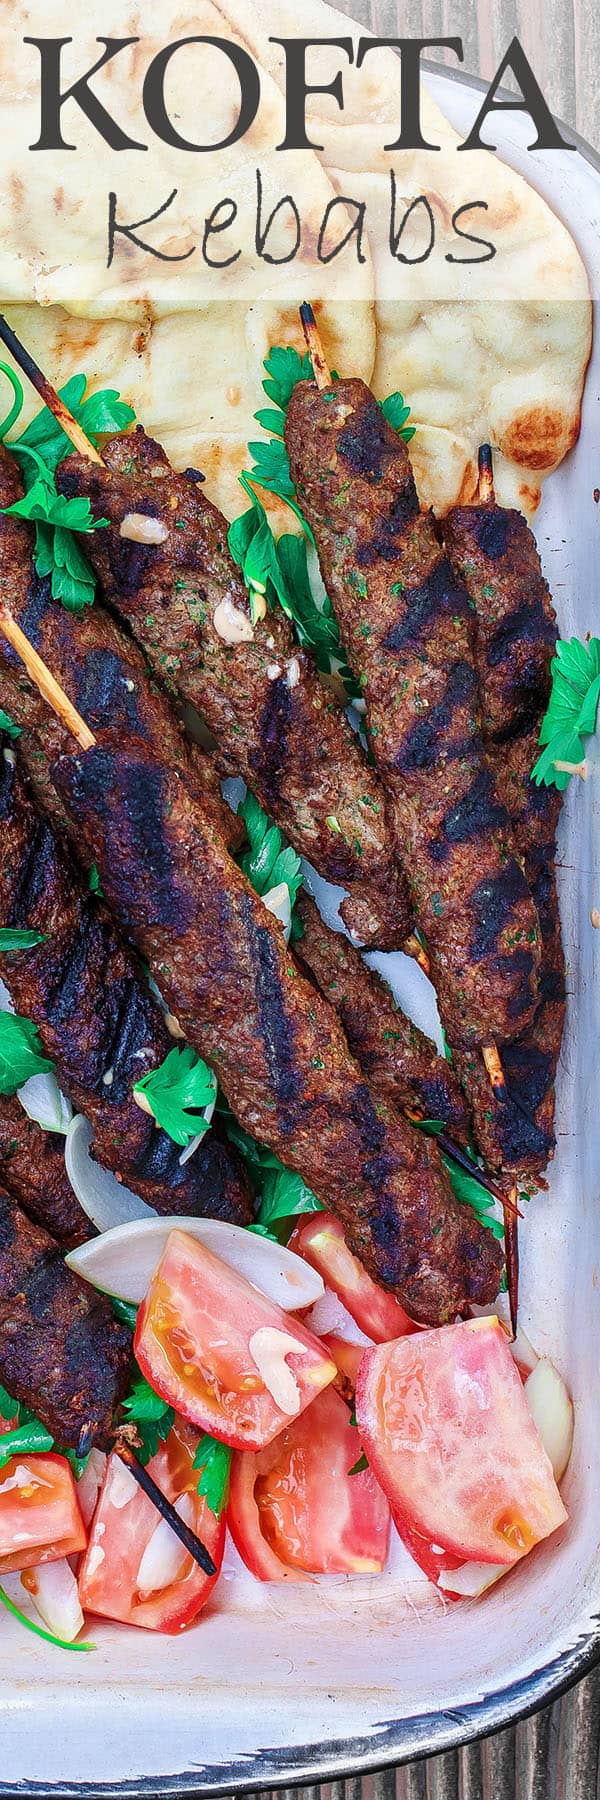 Kofta Kebab Recipe | The Mediterranean Dish. Authentic kofta kebabs with ground beef and lamb, garlic, onions, fresh parsley and warm Middle Eastern spices. See the step-by-step tutorial on The Mediterranean Dish.